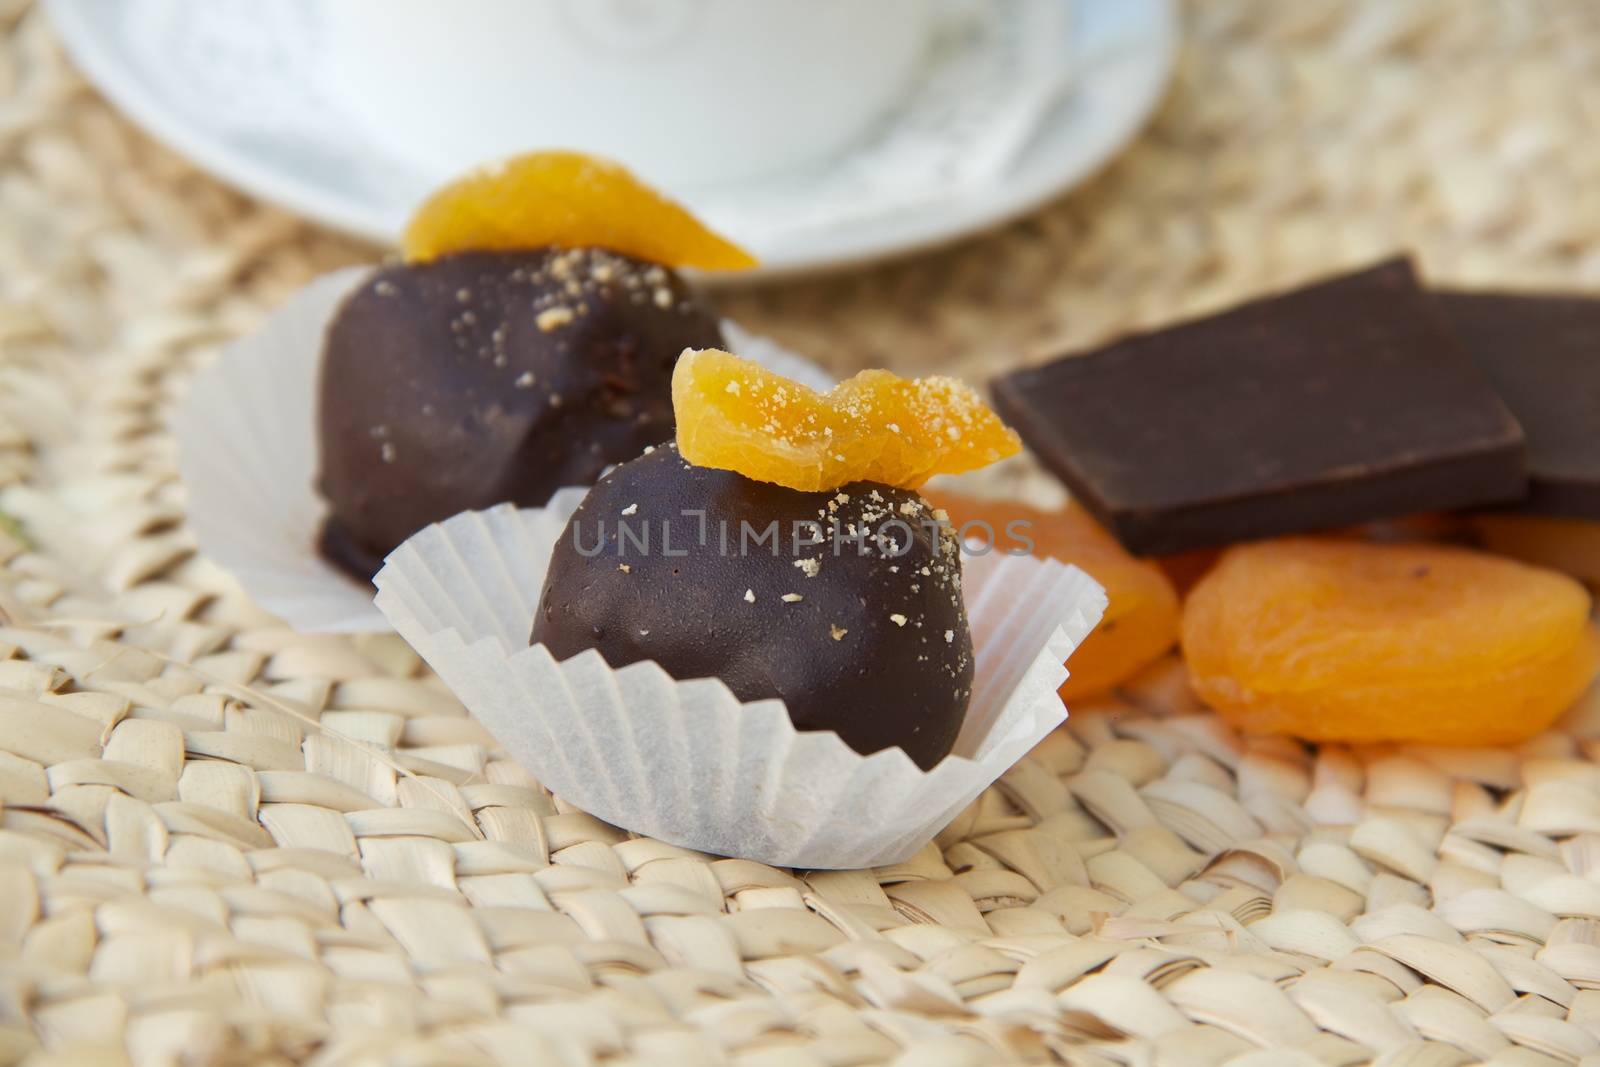 Handmade chocolate truffle with dried apricots on the woven surface. Dried apricots and pieces of black chocolate in the background